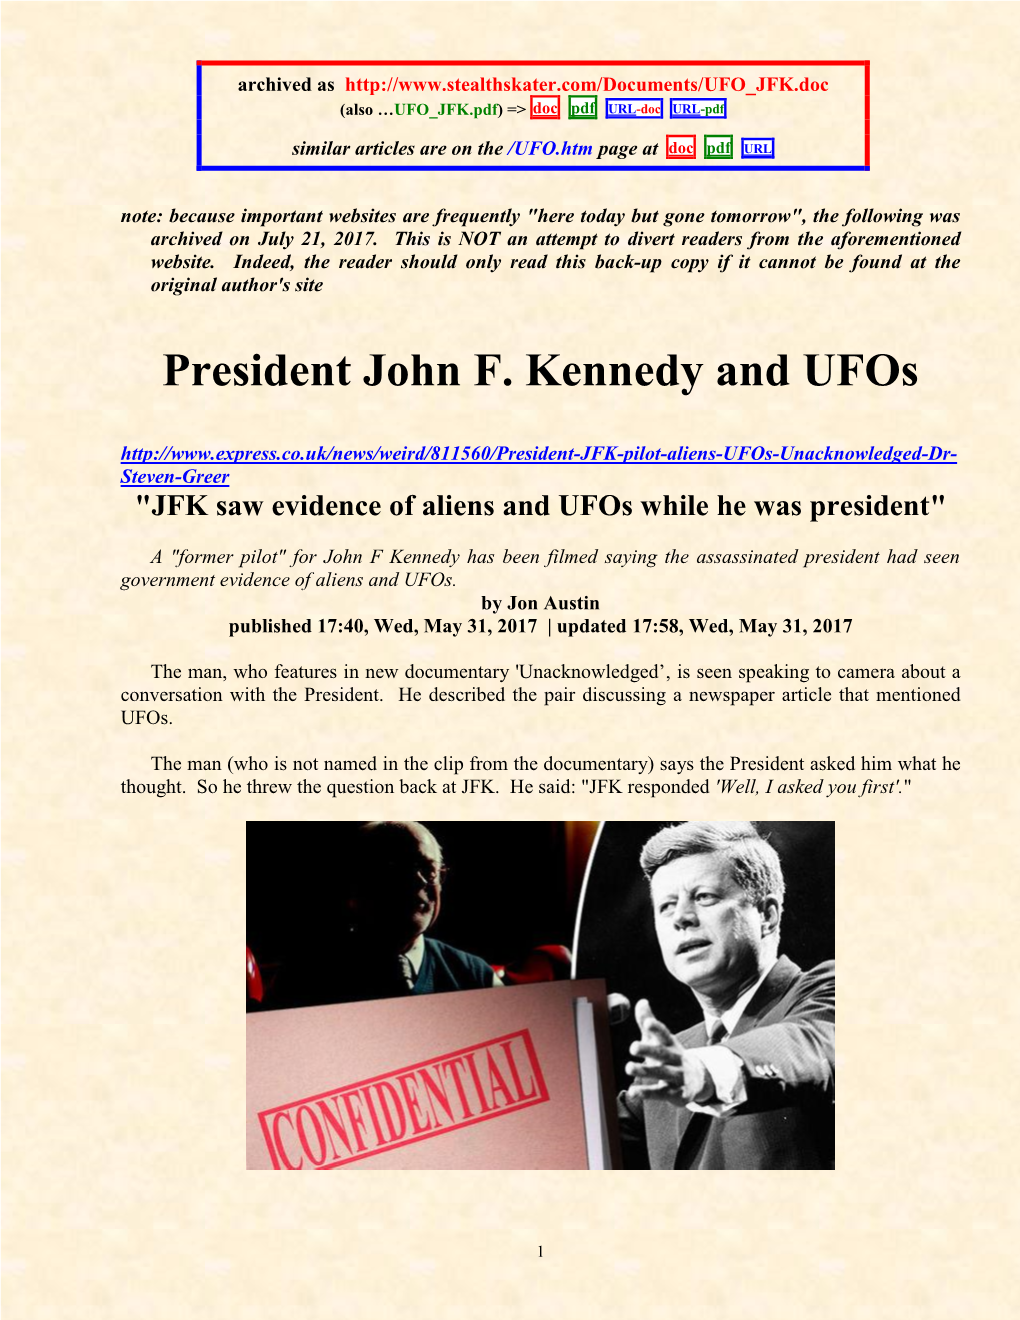 President John F. Kennedy and Ufos